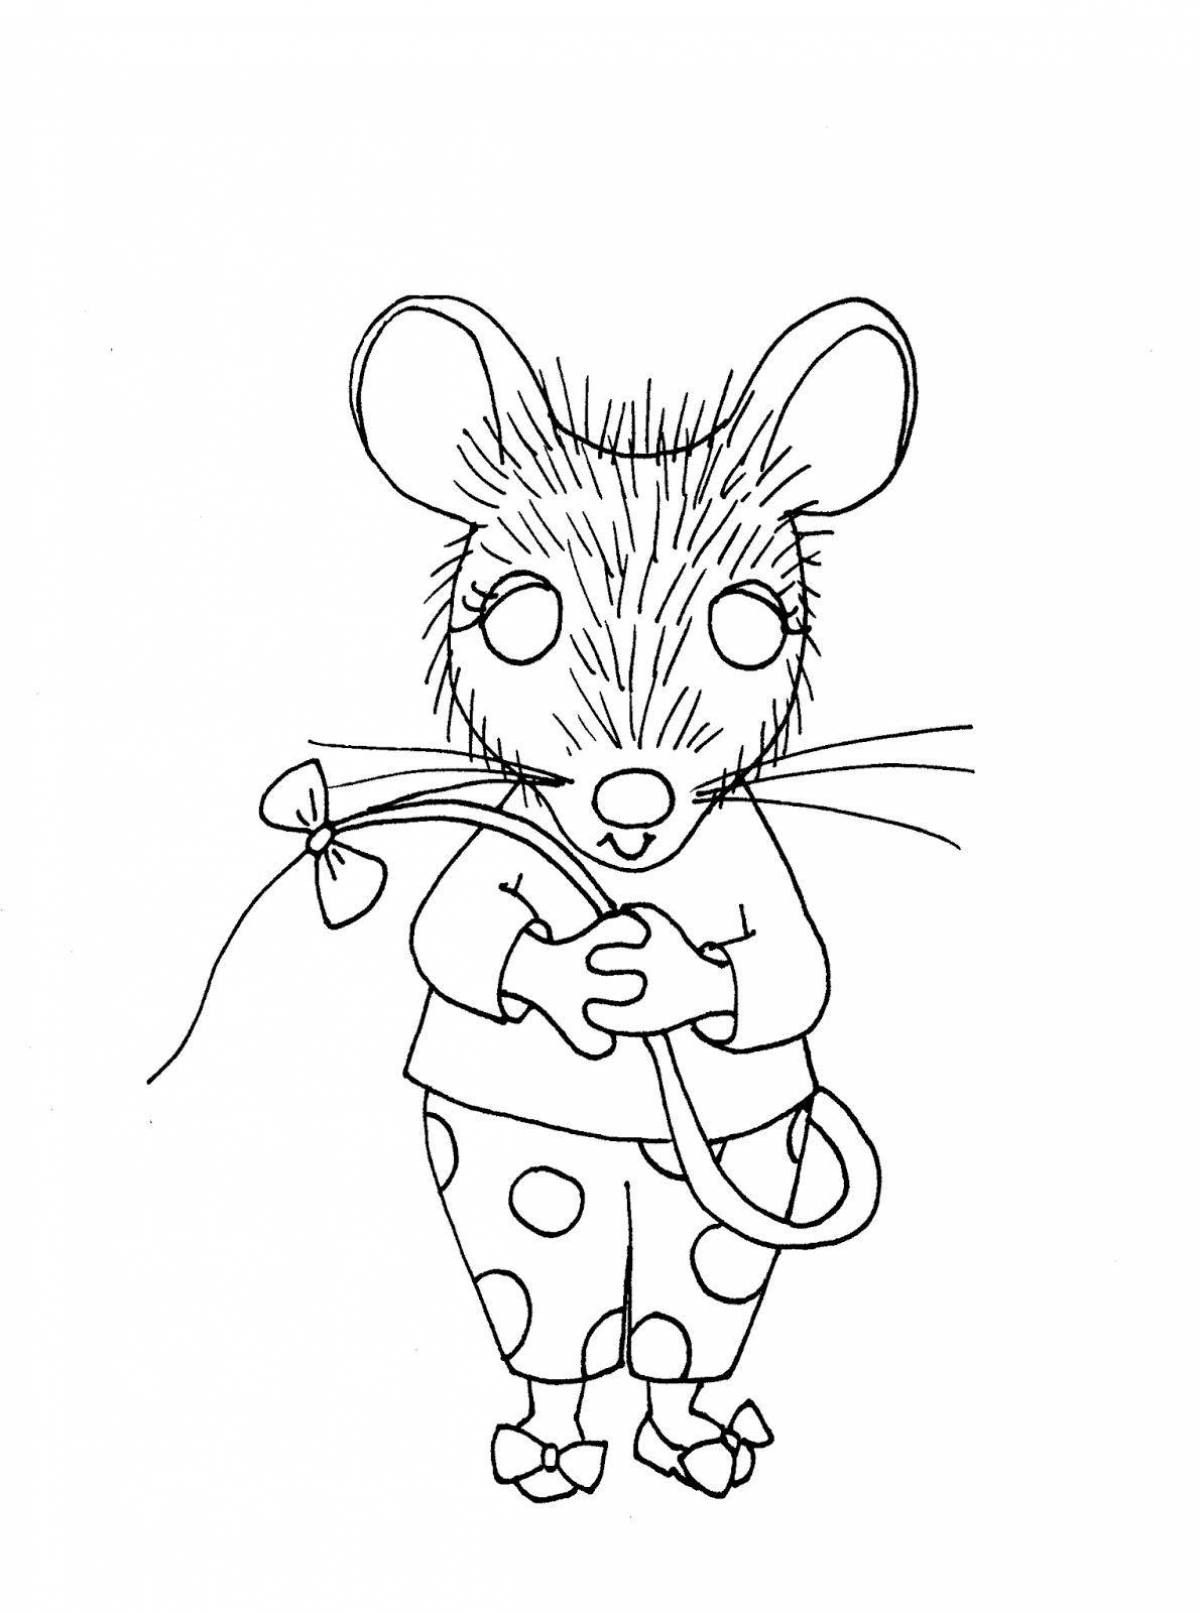 Coloring book funny norushka mouse